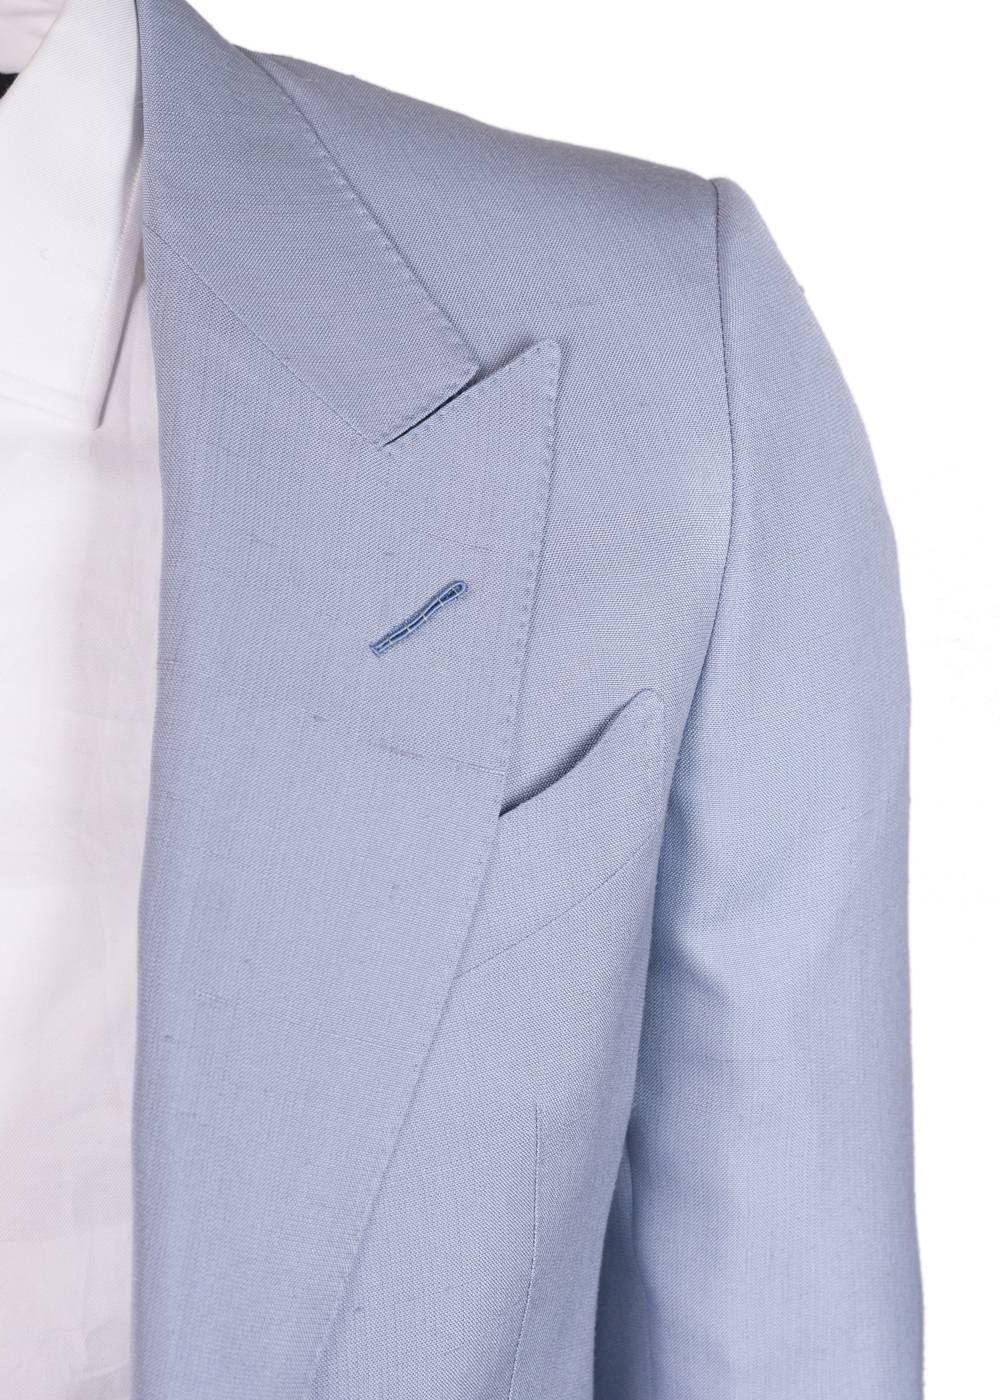 Brand New Tom Ford Silk Suit Jacket
Original Tags & Hanger Included
Retails In-Stores & Online for $2,350
Size EUR 46 R / US 36 R Fits True to Size

Top off your ensemble with this priceless Tom Ford edition. This pure silk suit jacket features a